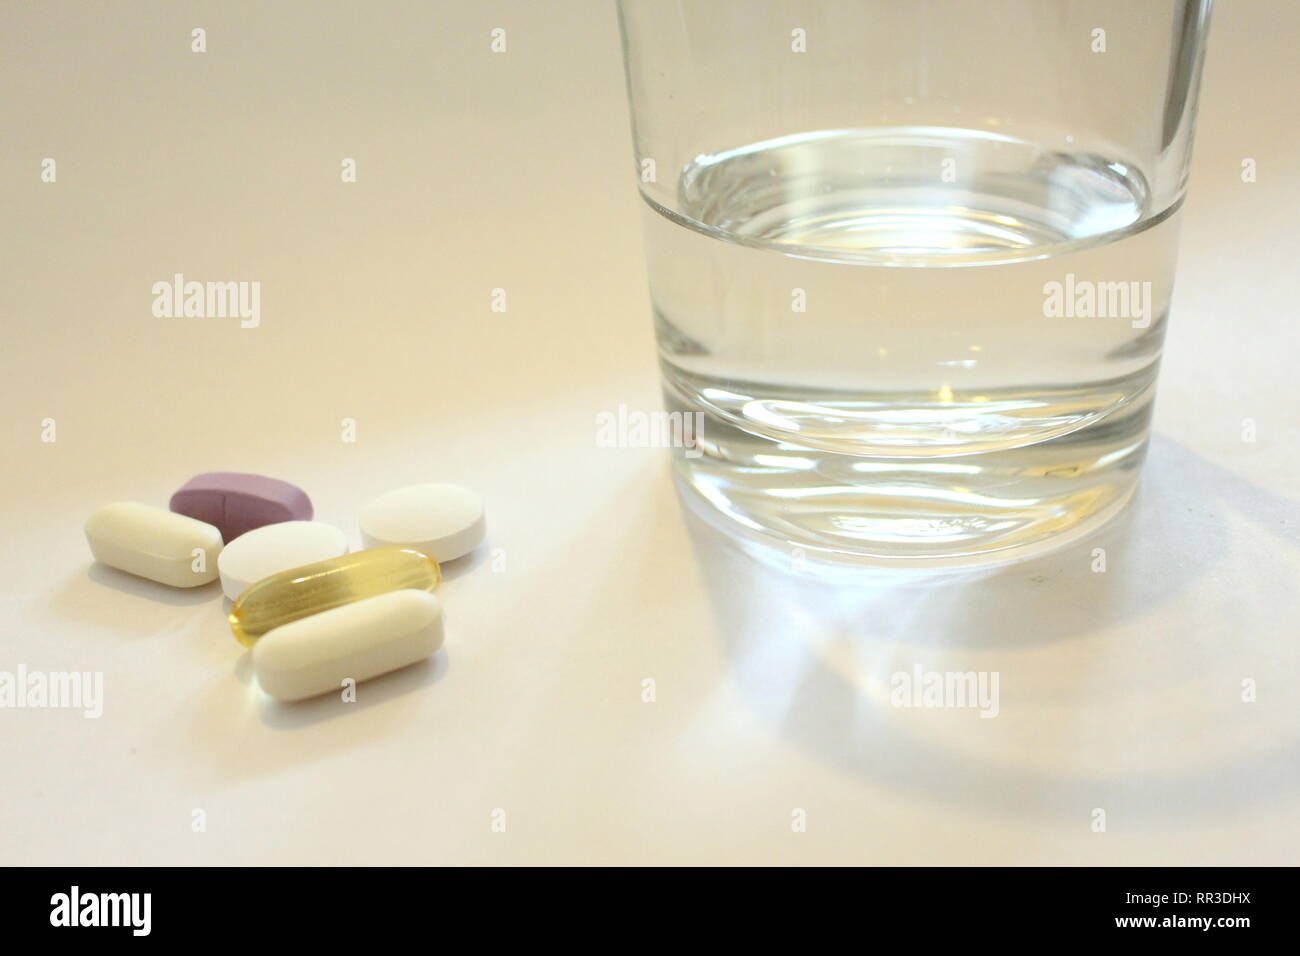 A photograph of a handful of various pills on a white background next to a glass of water. Concept of taking medication or supplements. Stock Photo